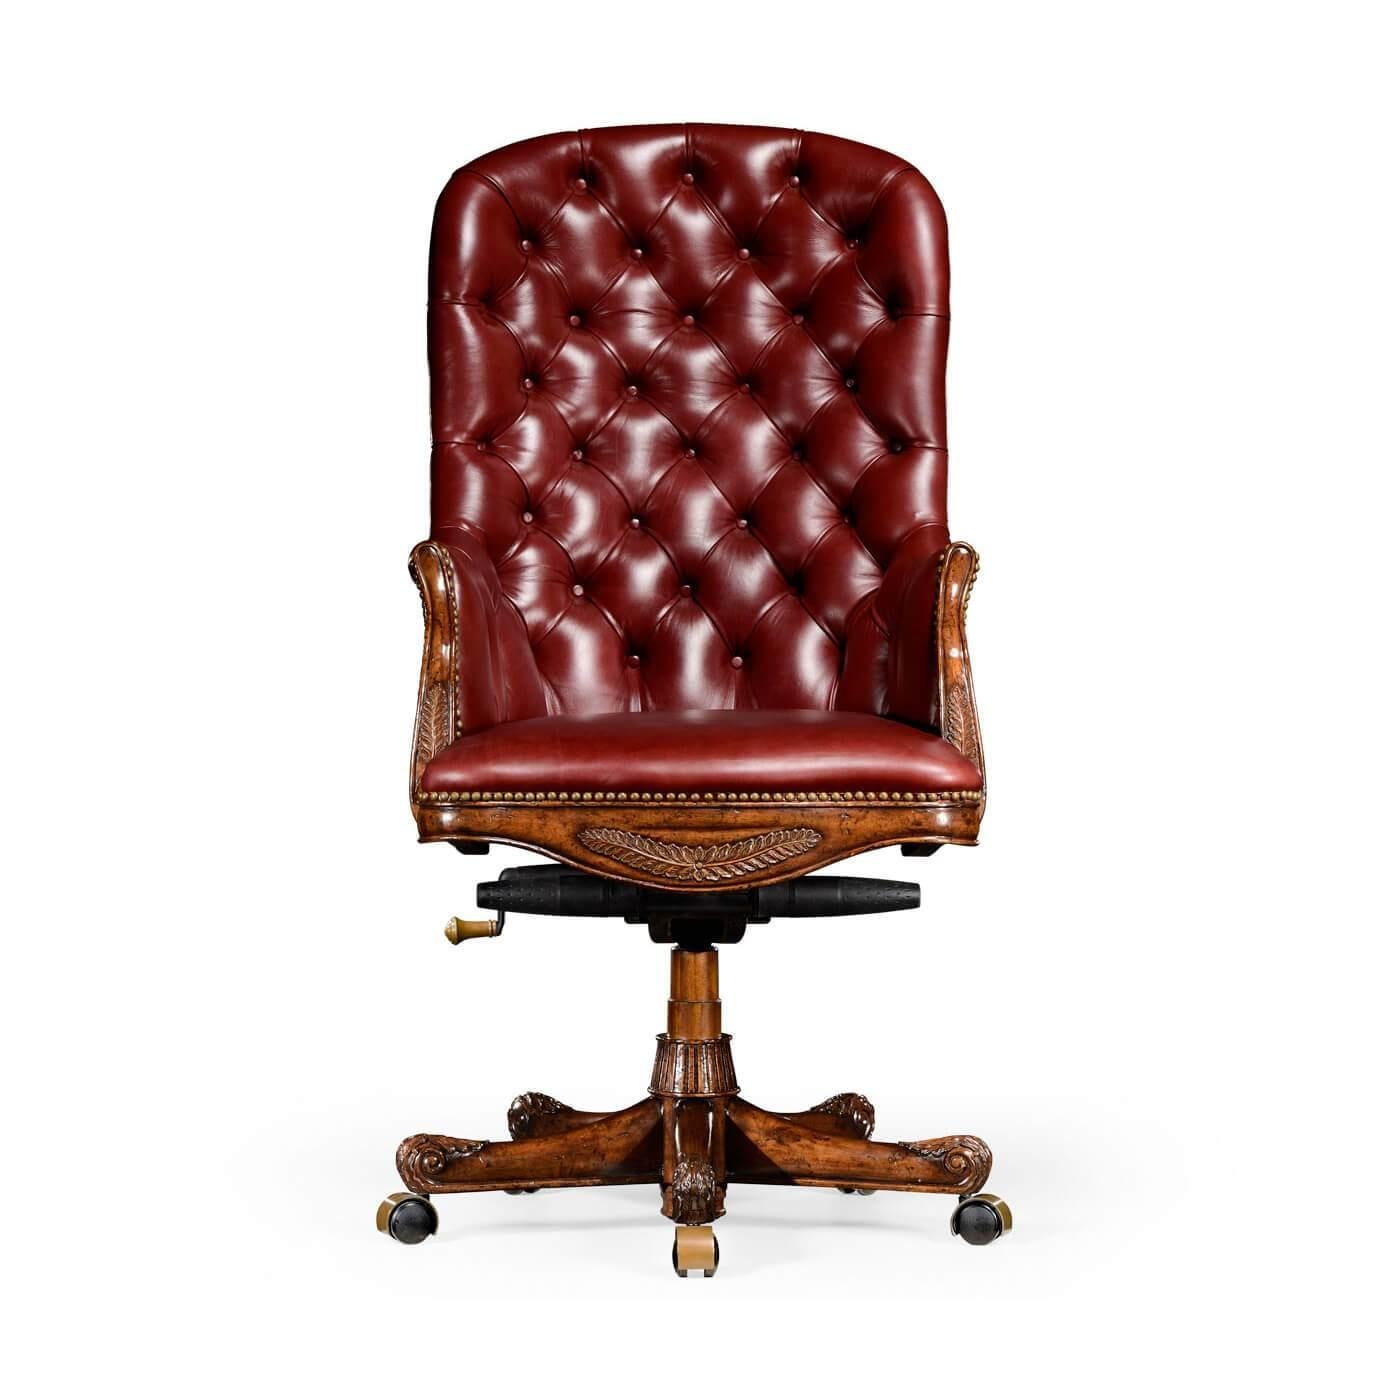 English style buttoned and studded burgundy red leather desk chair with a mahogany frame, fully adjustable and set on five legs with castors and finely carved details. High back.

Dimensions: 27.25